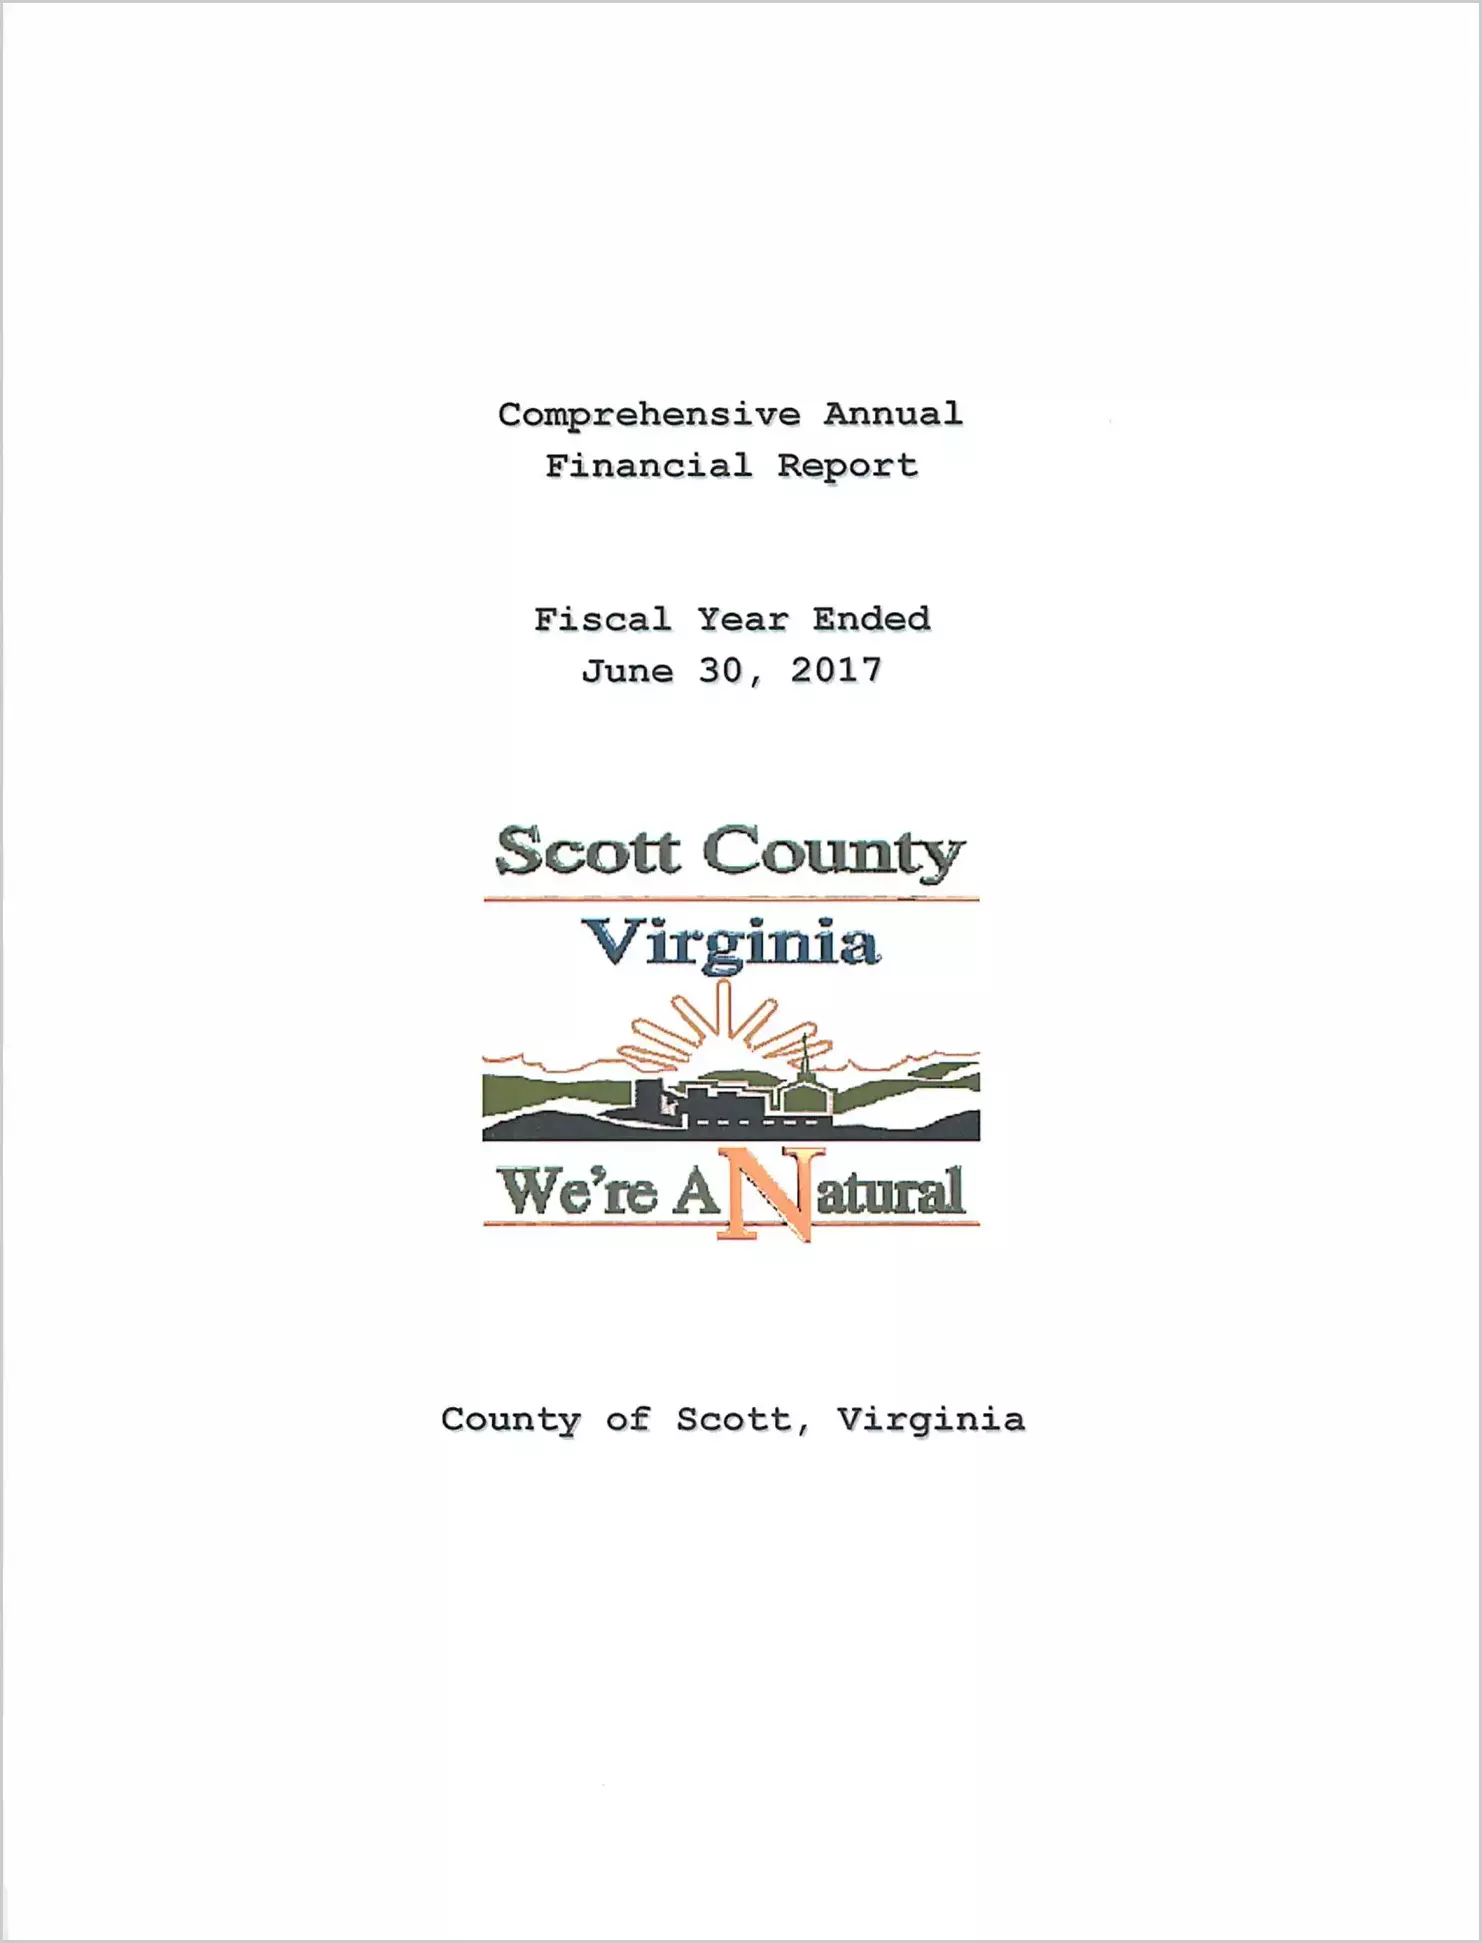 2017 Annual Financial Report for County of Scott